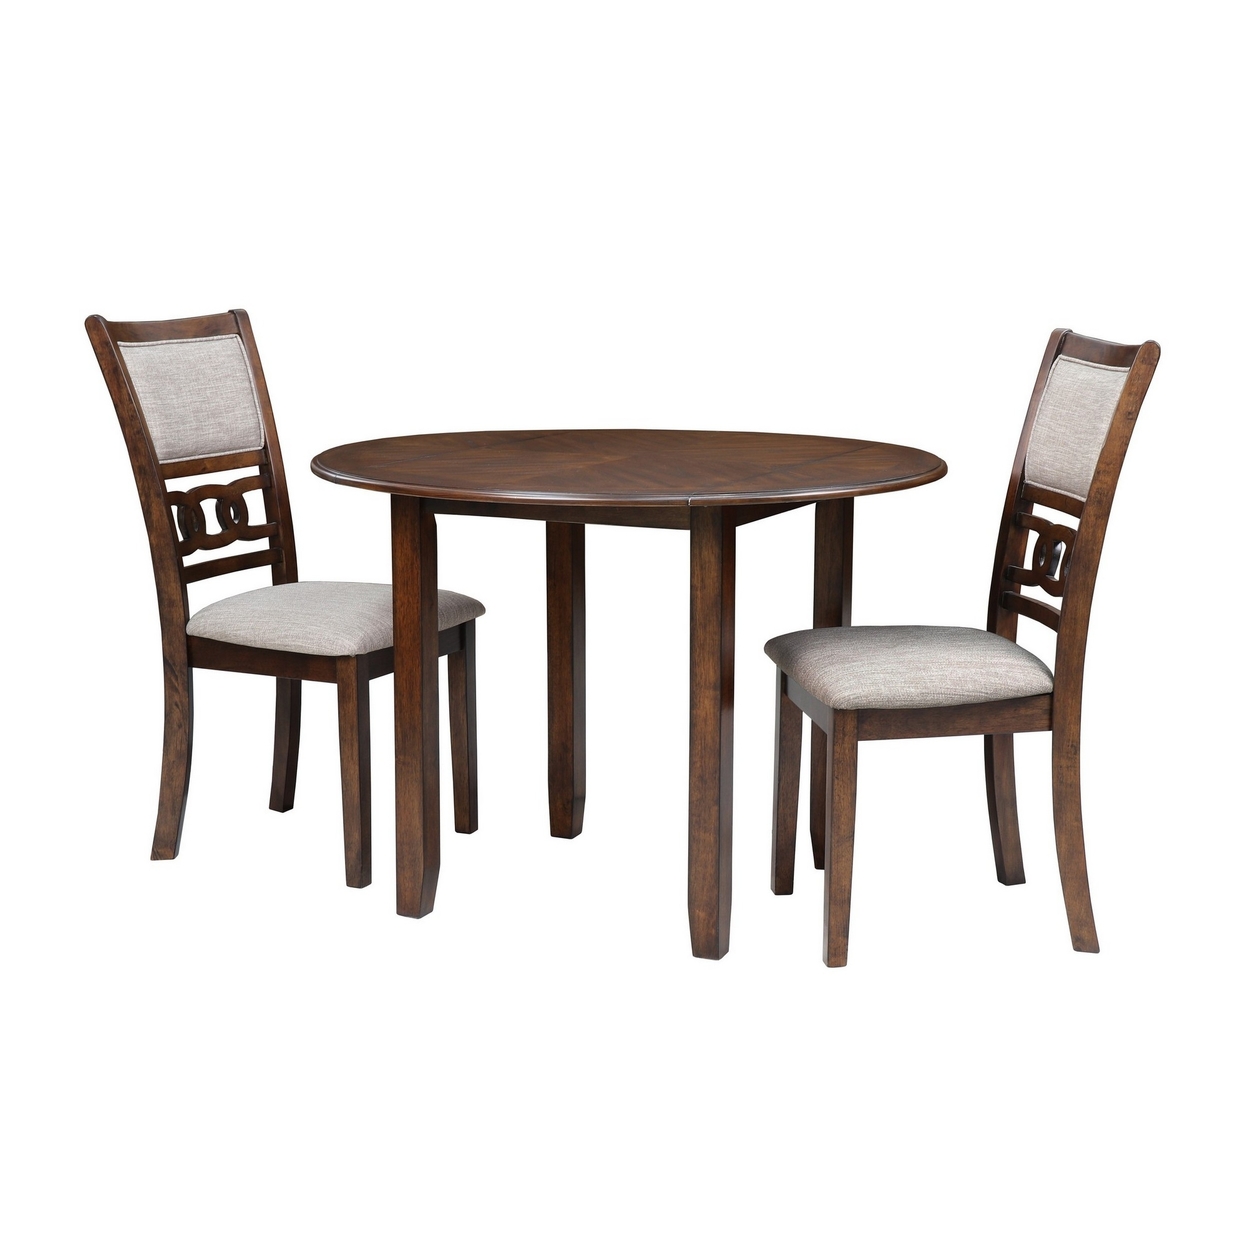 3pc 42 Inch Dining Table Set, Extendable Drop Leaves, 2 Chairs, Brown -Saltoro Sherpi